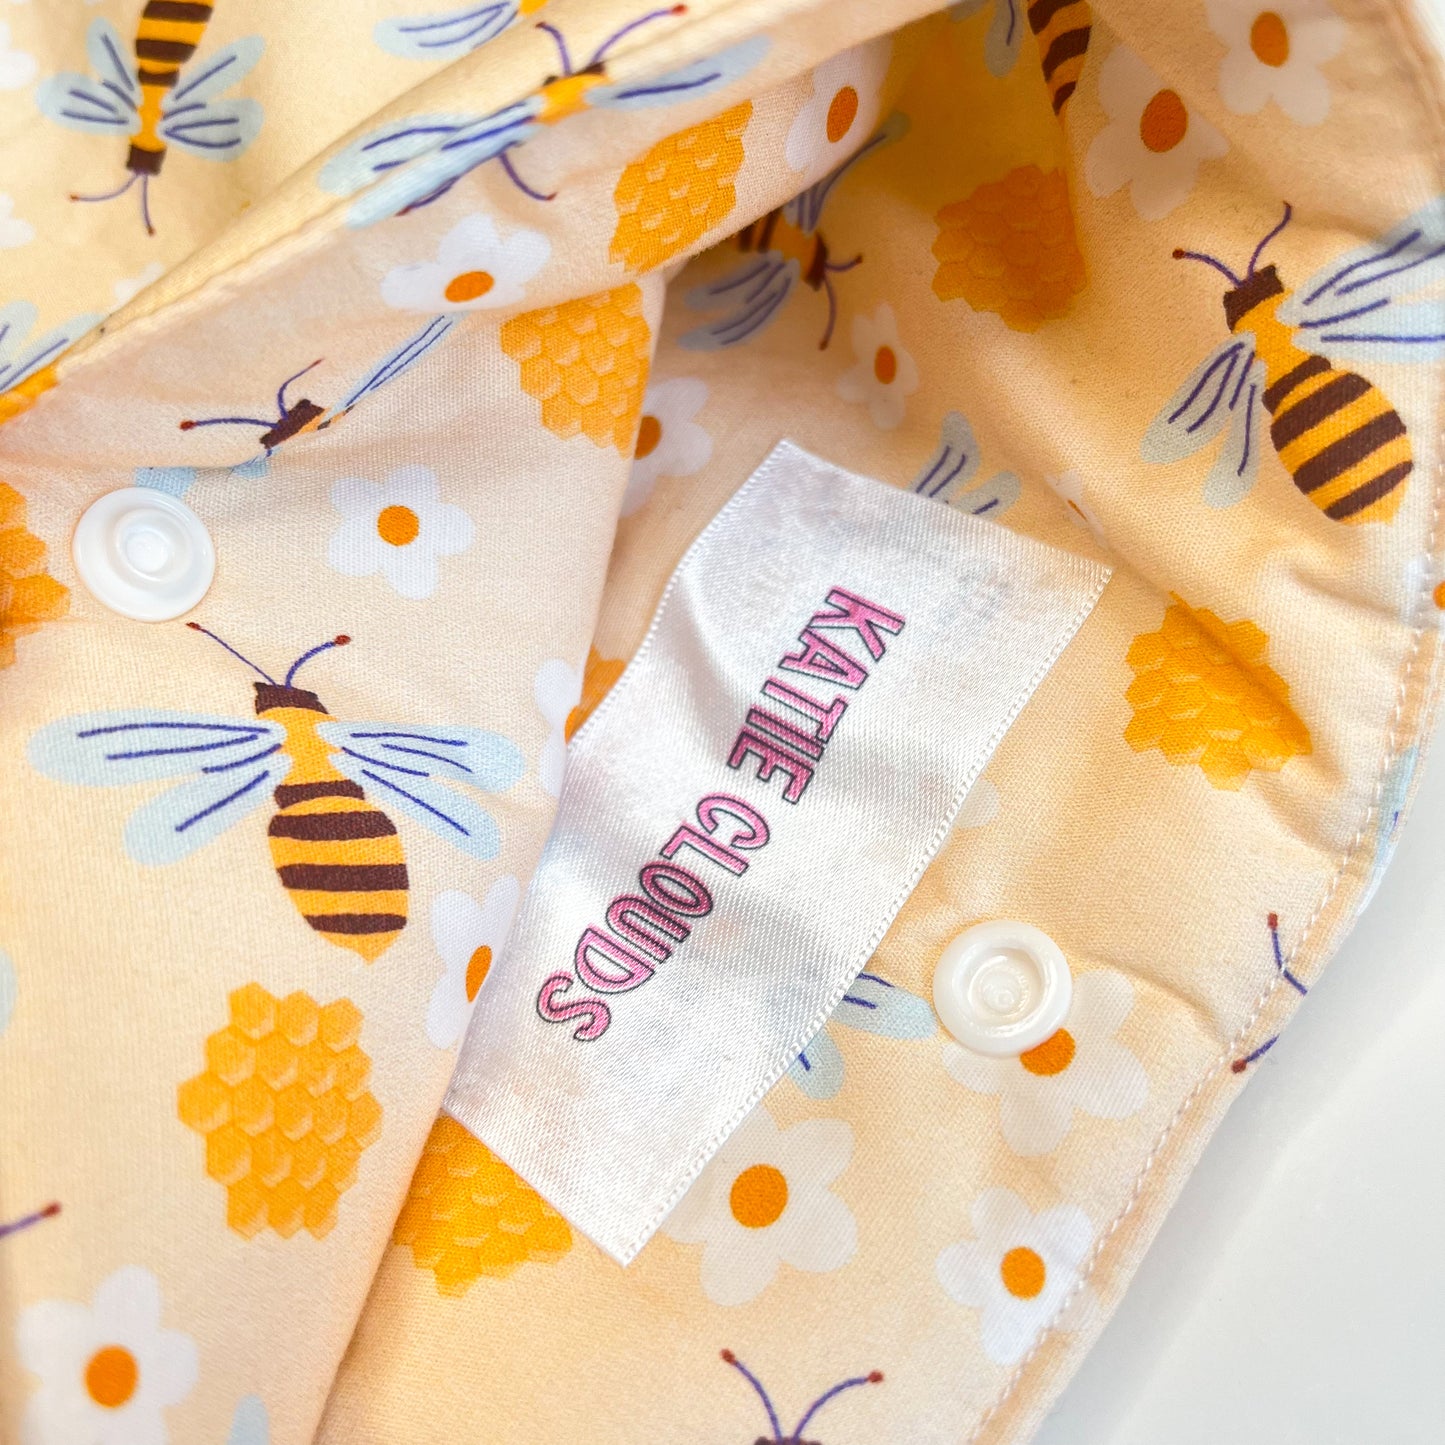 Bees Book Sleeve